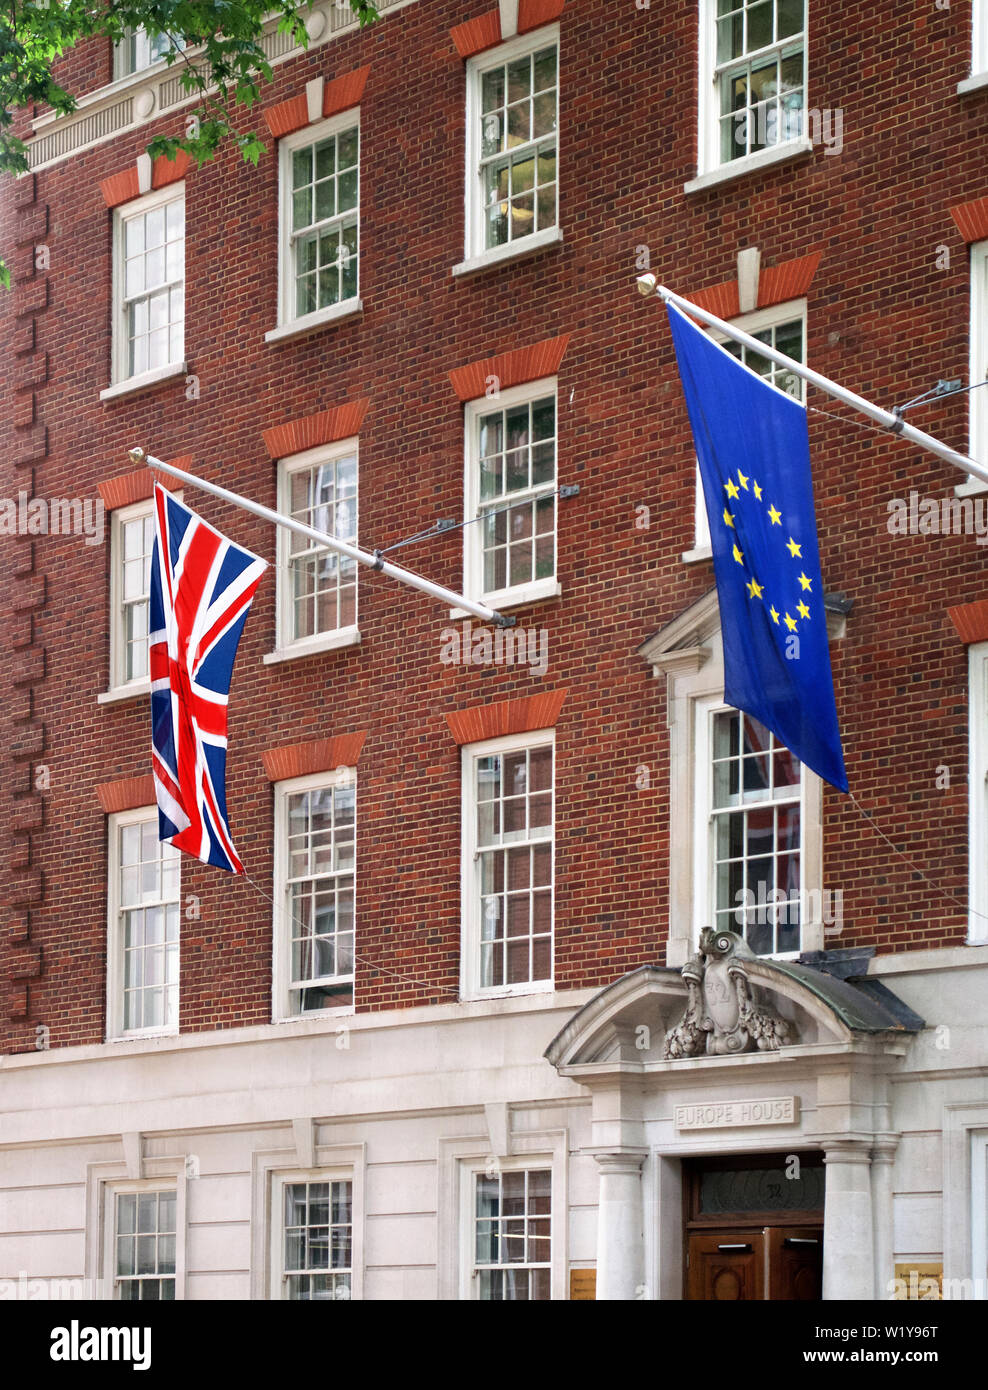 The flags of Great Britain and the European Union flying side by side in Smith Square, London Stock Photo